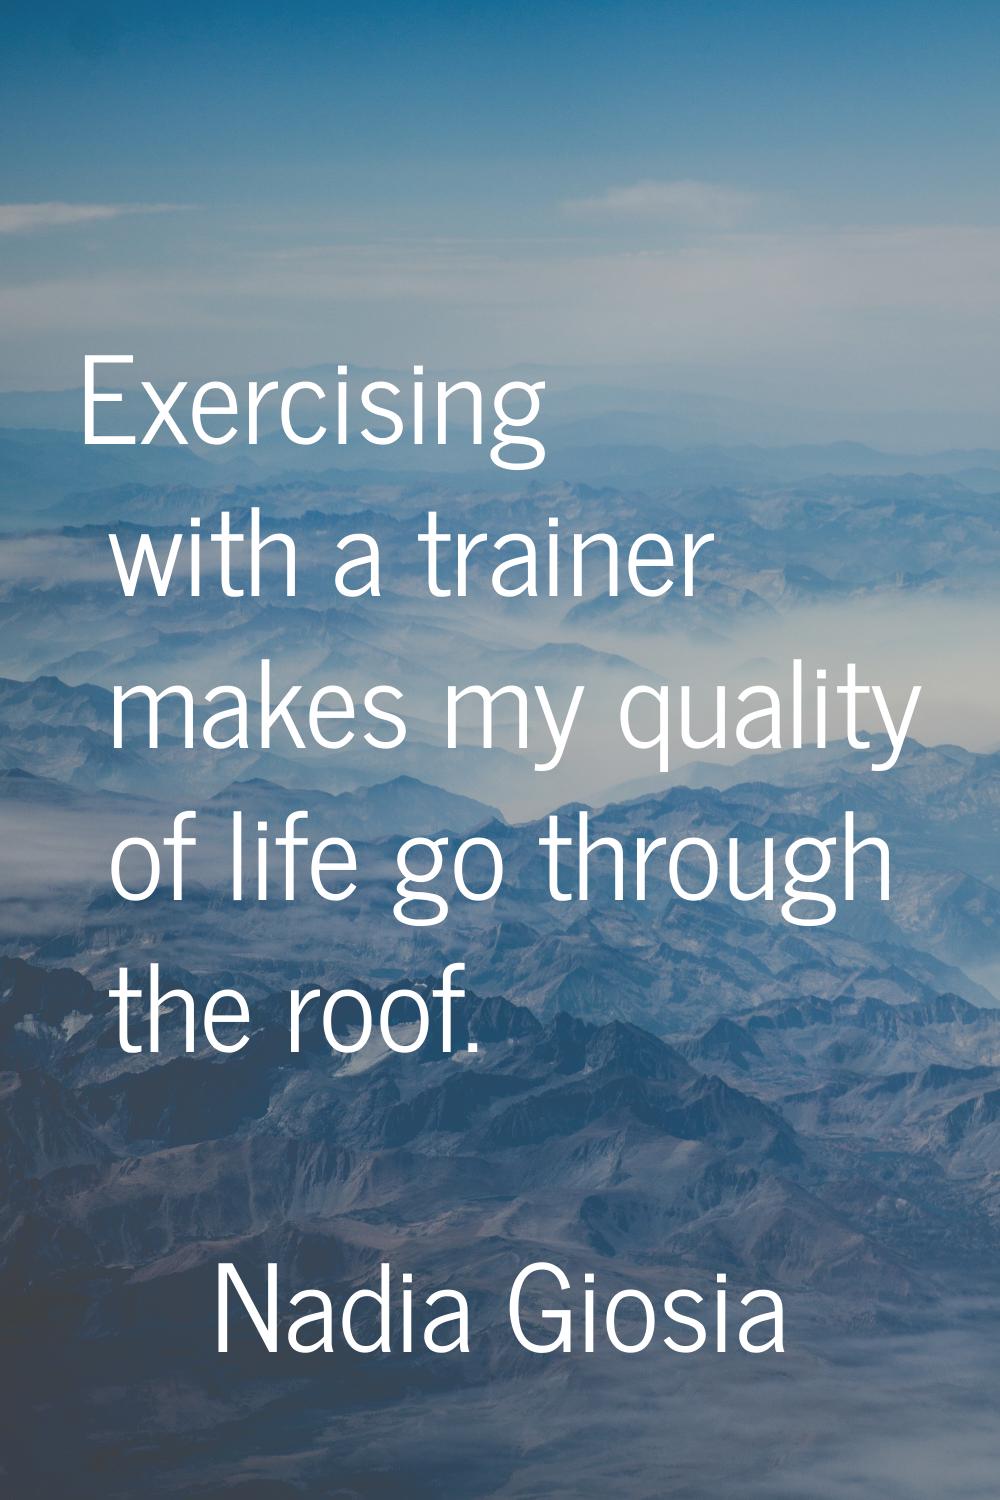 Exercising with a trainer makes my quality of life go through the roof.